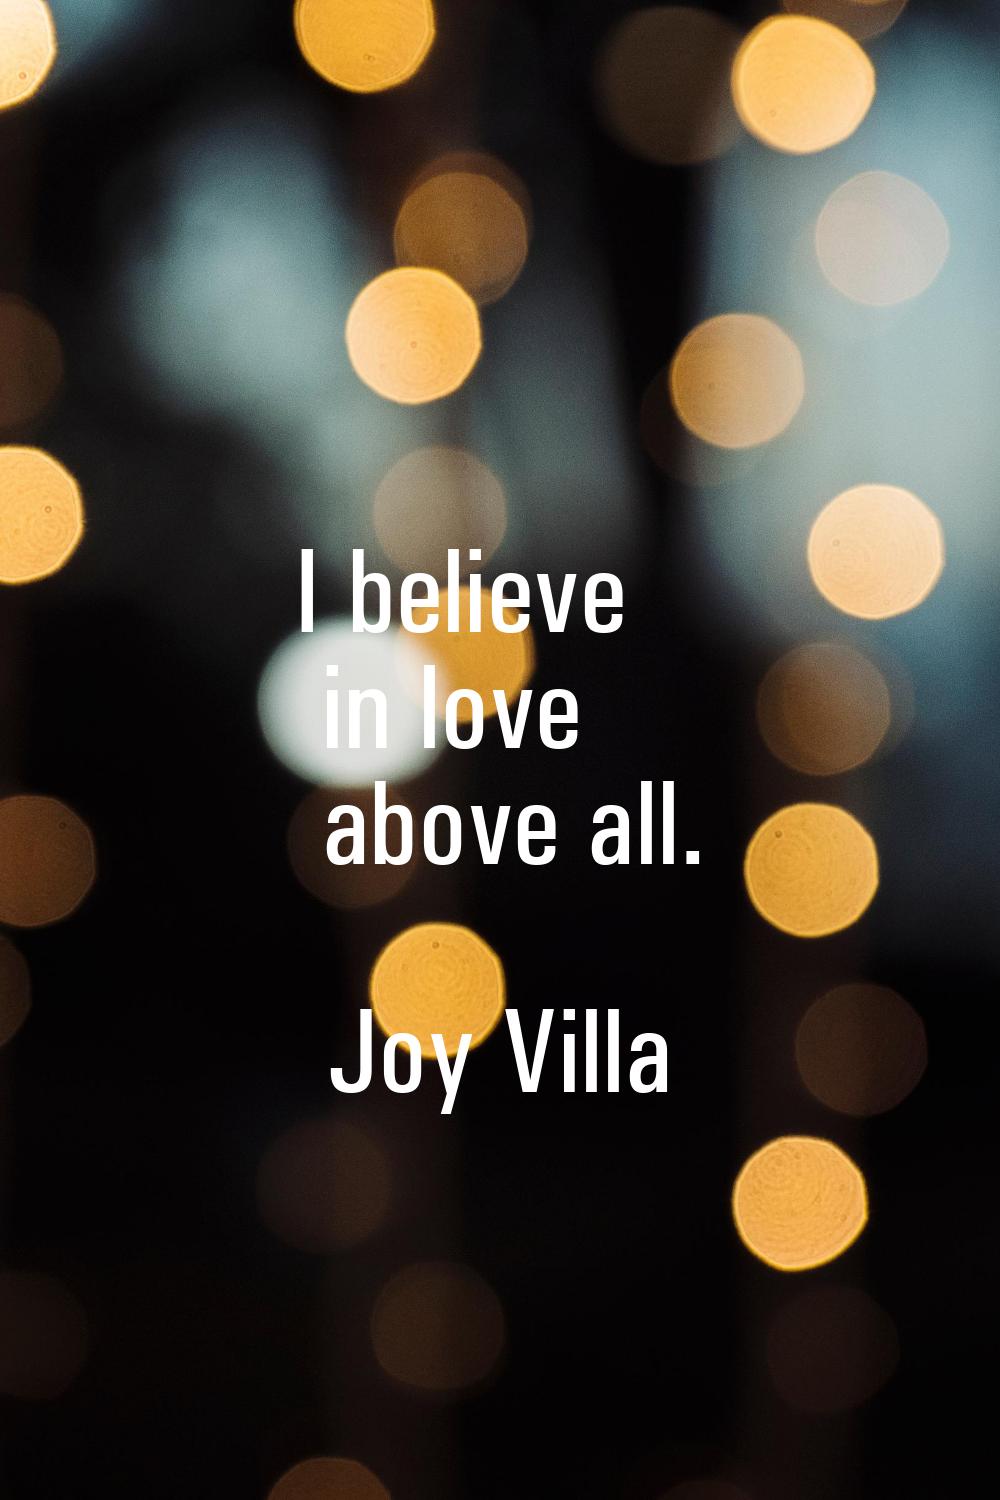 I believe in love above all.